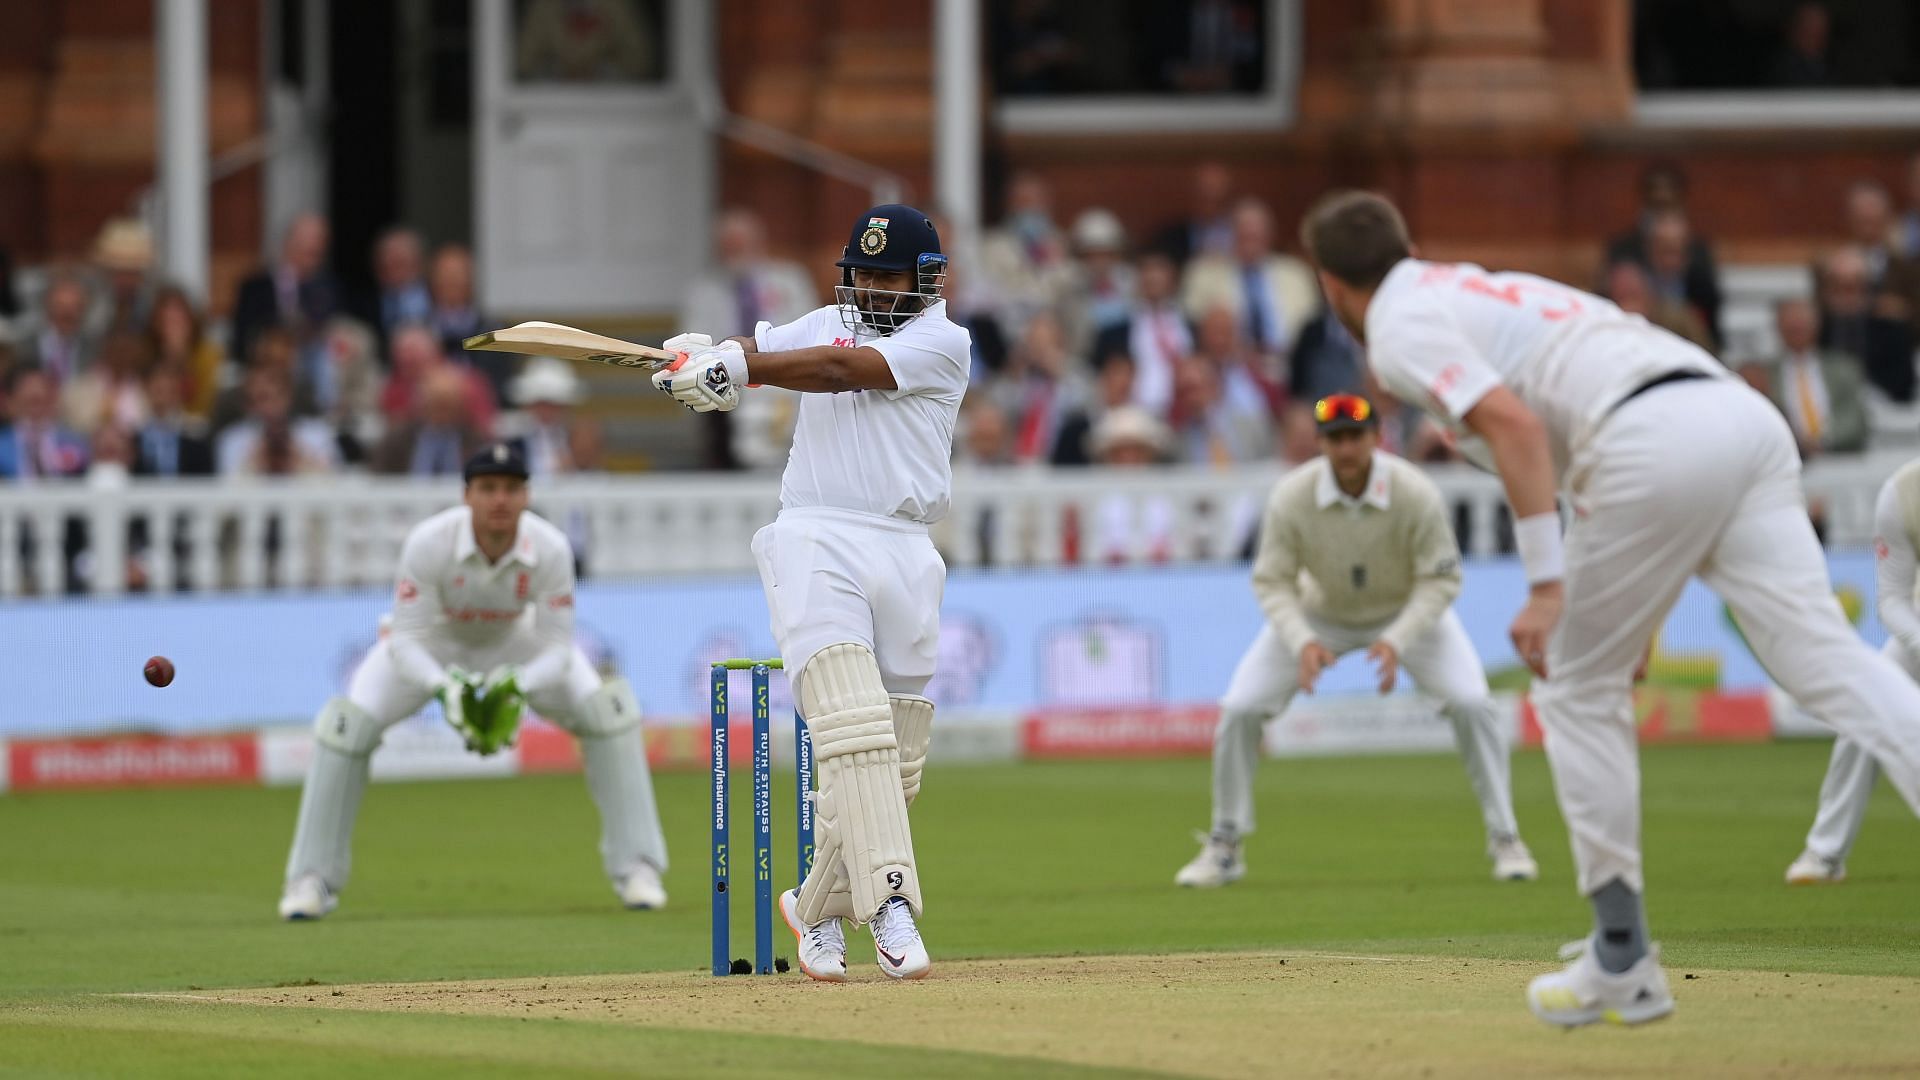 Rishabh Pant can provide some variety in the Indian middle order as a left-hander